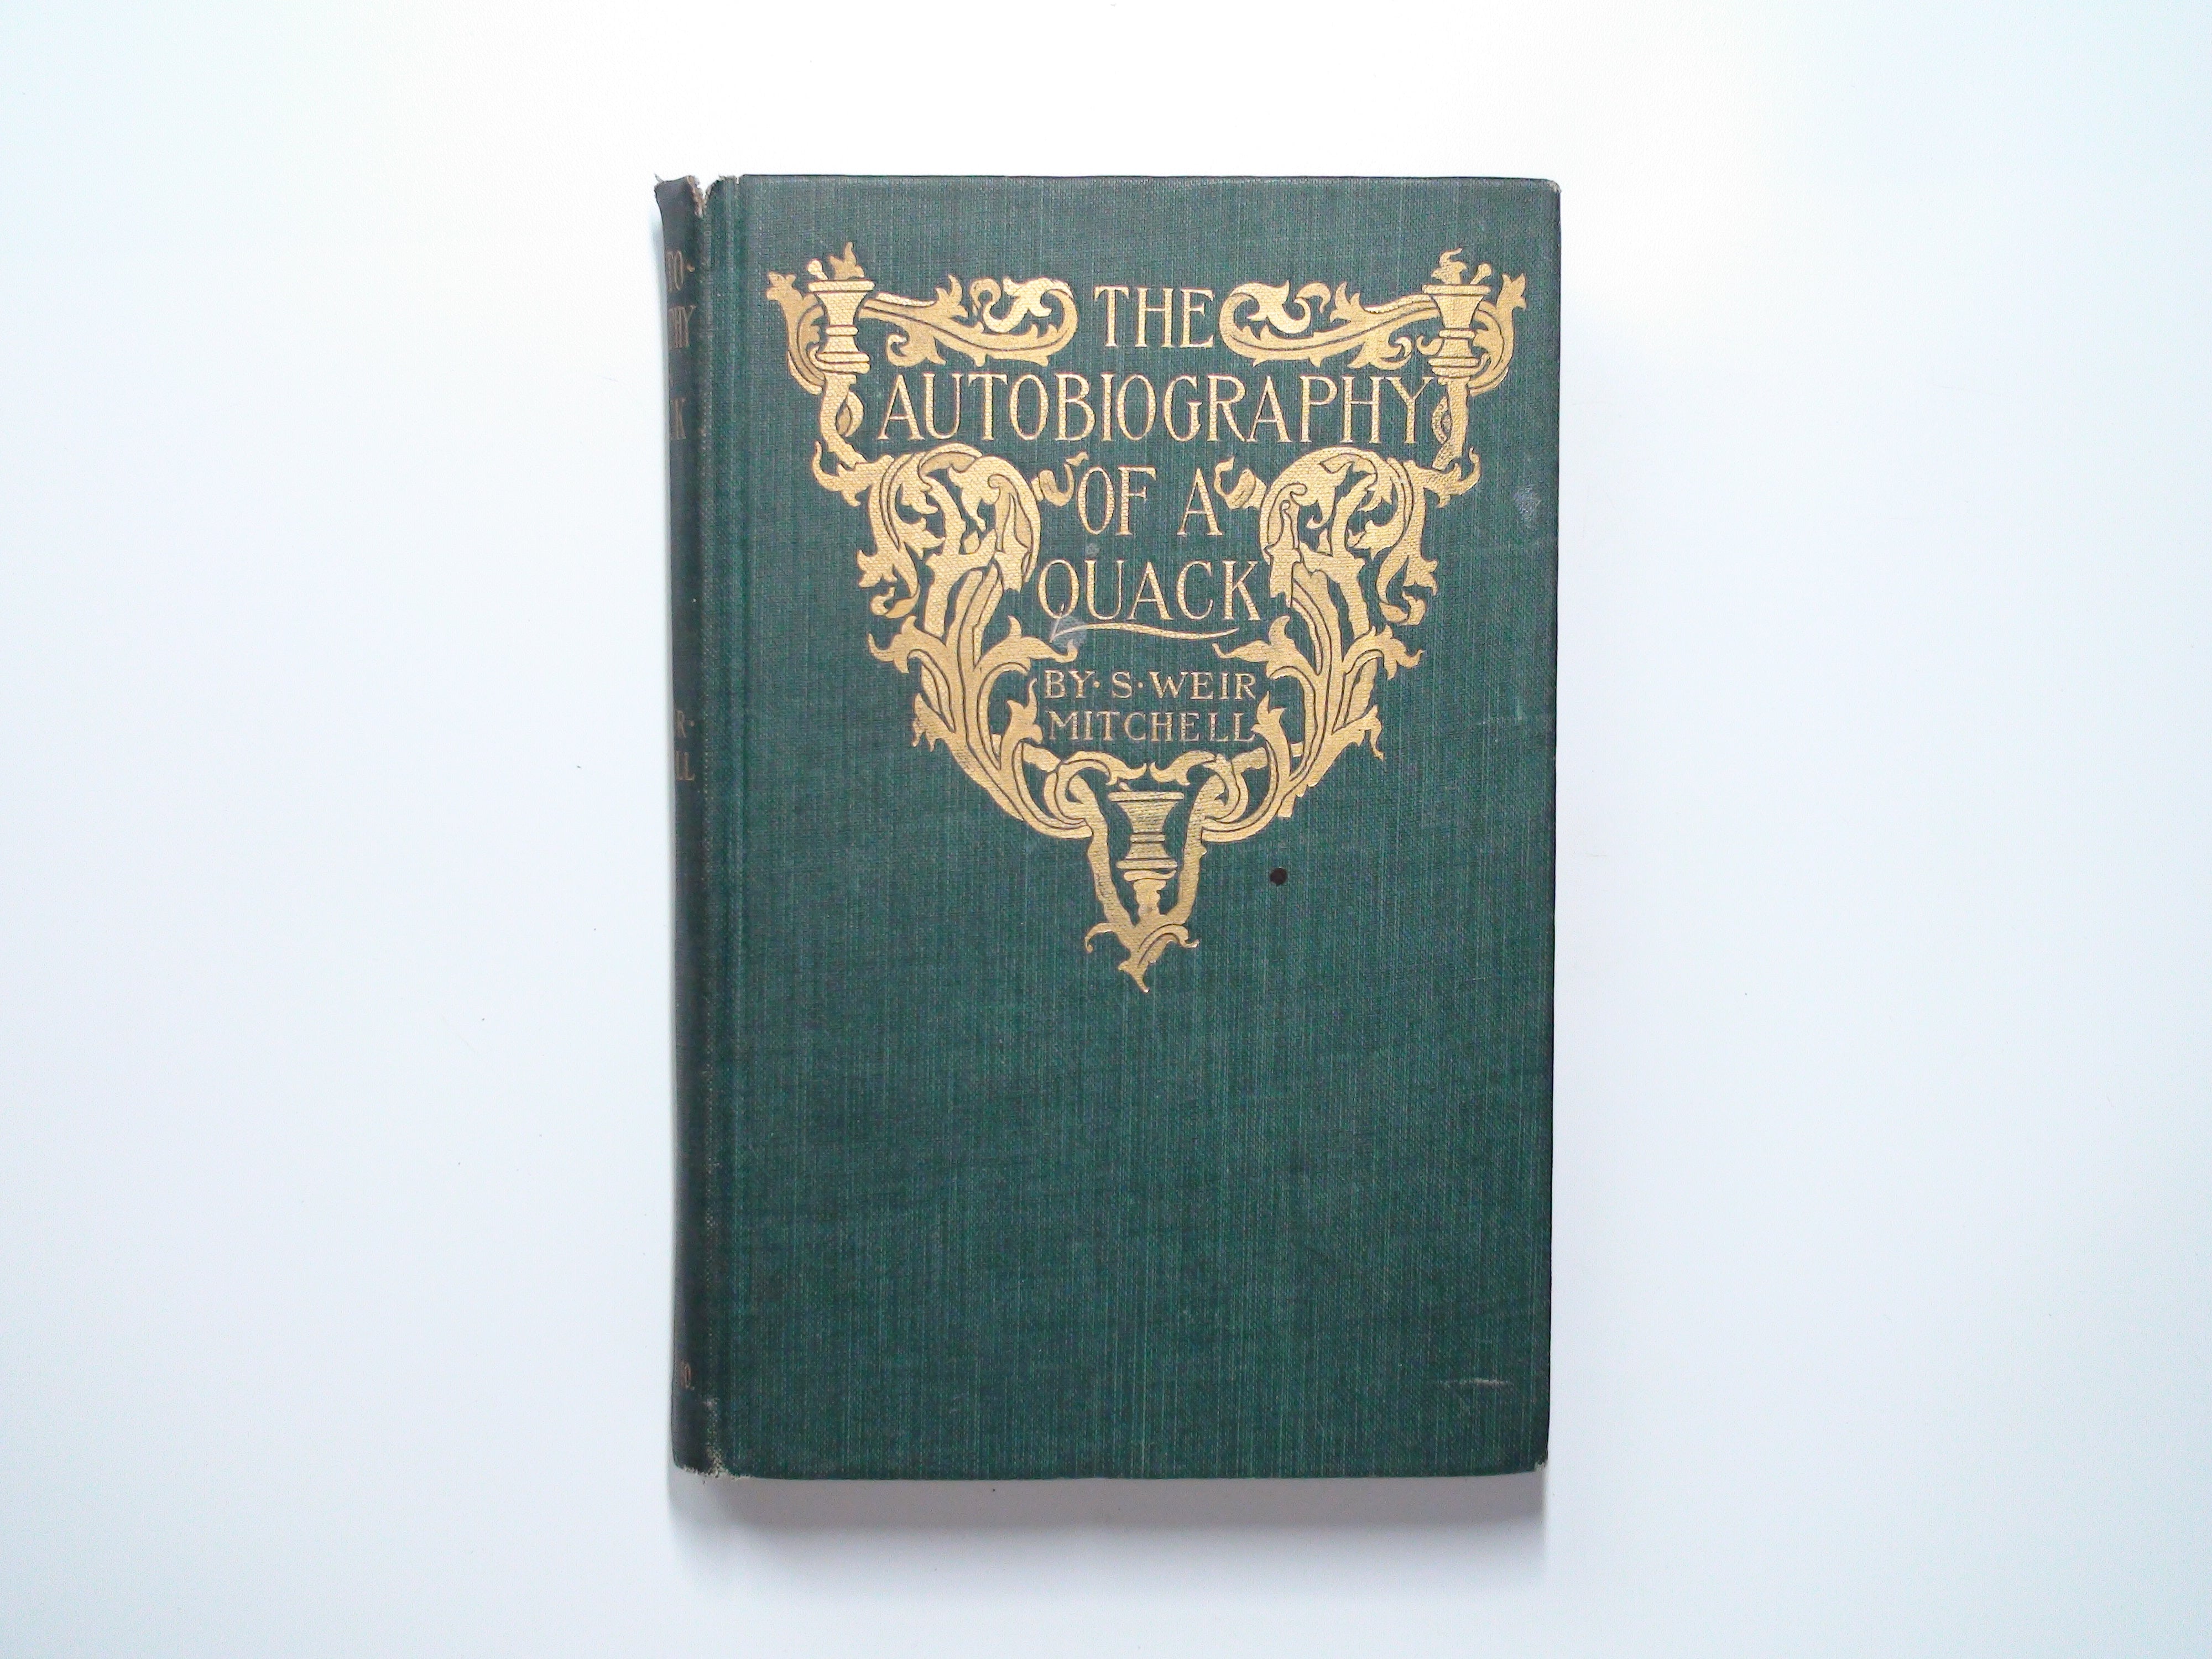 The Autobiography of a Quack, The Case of George Dedlow, S. Weir Mitchell, 1900